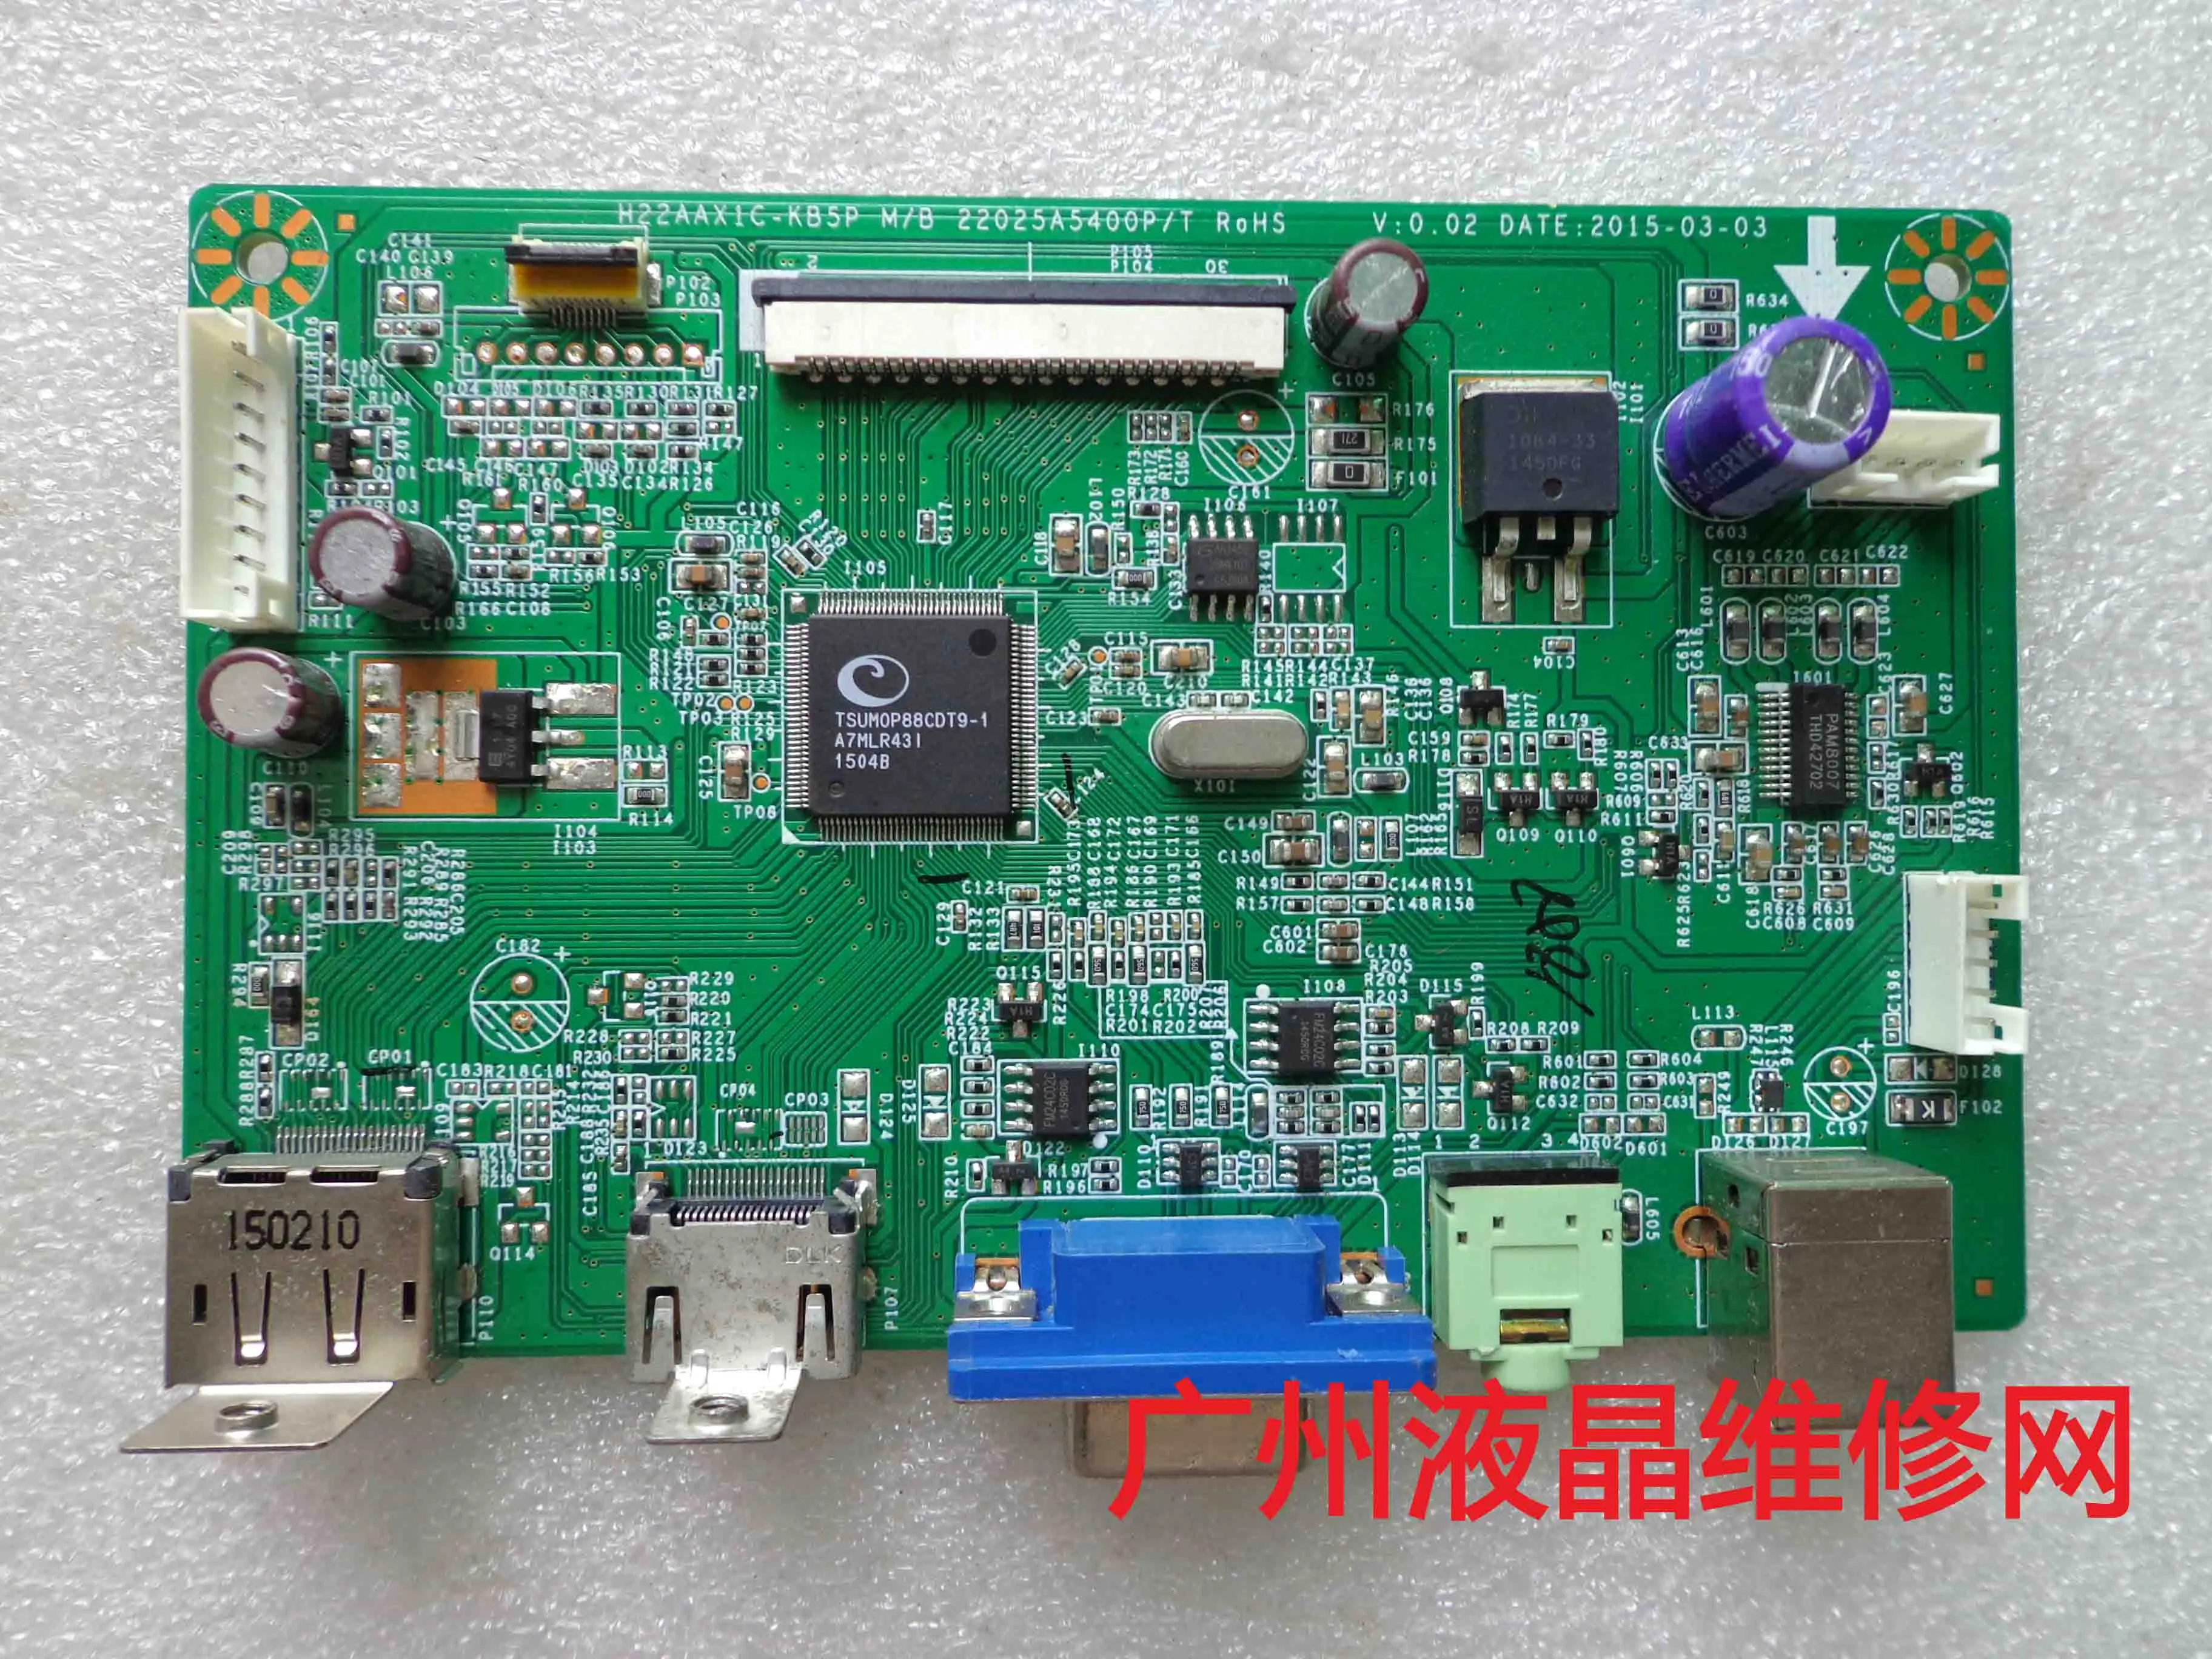 

PLANAR PXL2230MW driver board H22AAX1C-KB5P M/B 22025A5400P/T the mainboard